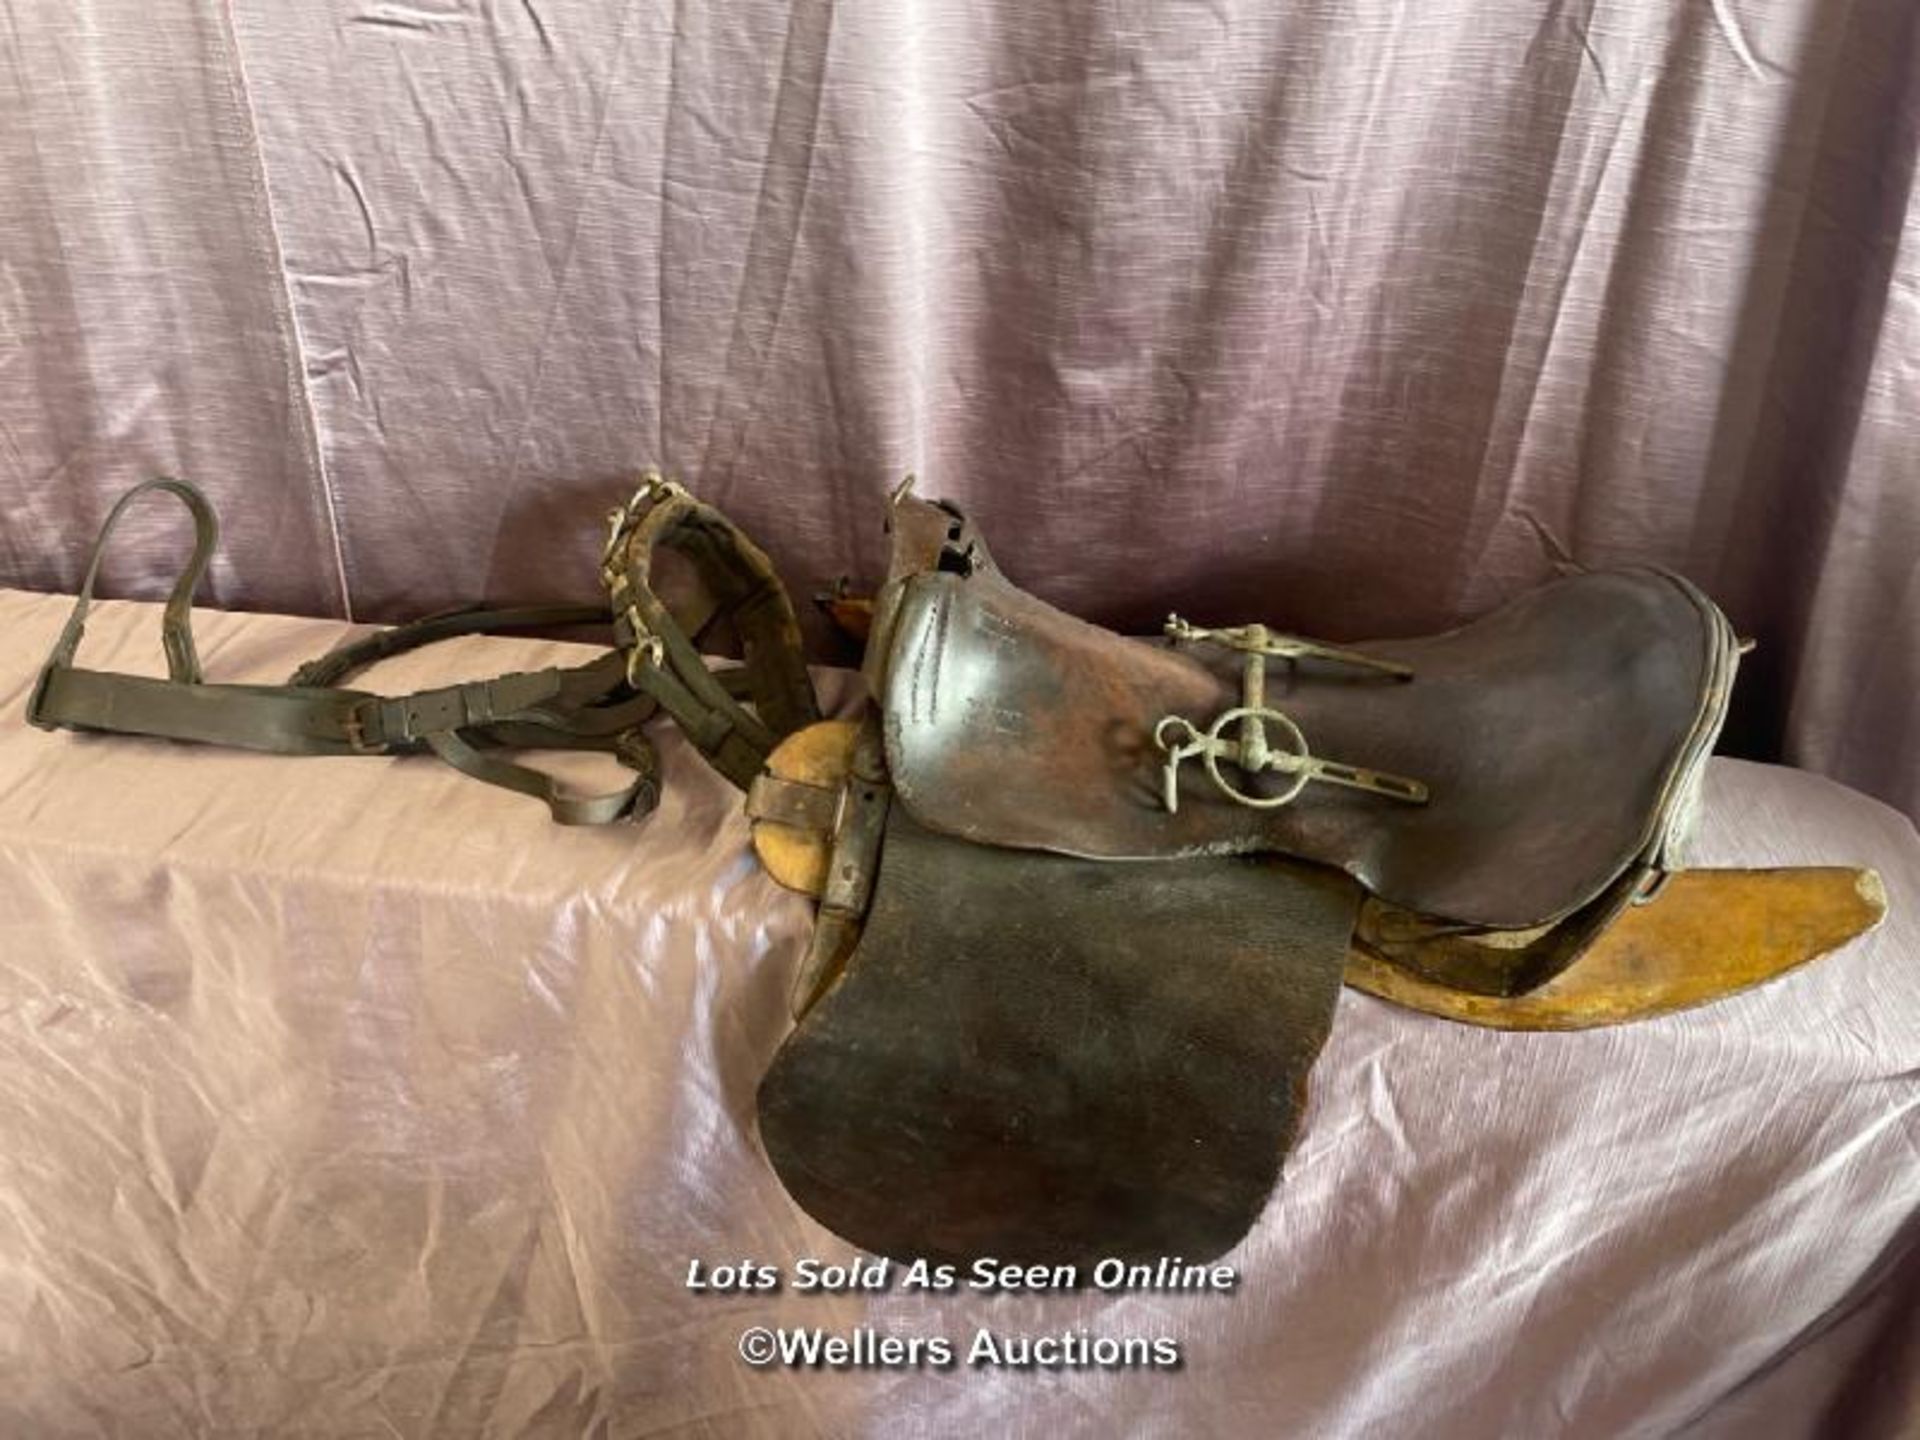 CIRCA 1900, BOER WAR PERIOD MILITARY SADDLE WITH ASSOCIATED HORSE BIT AND HARNESS